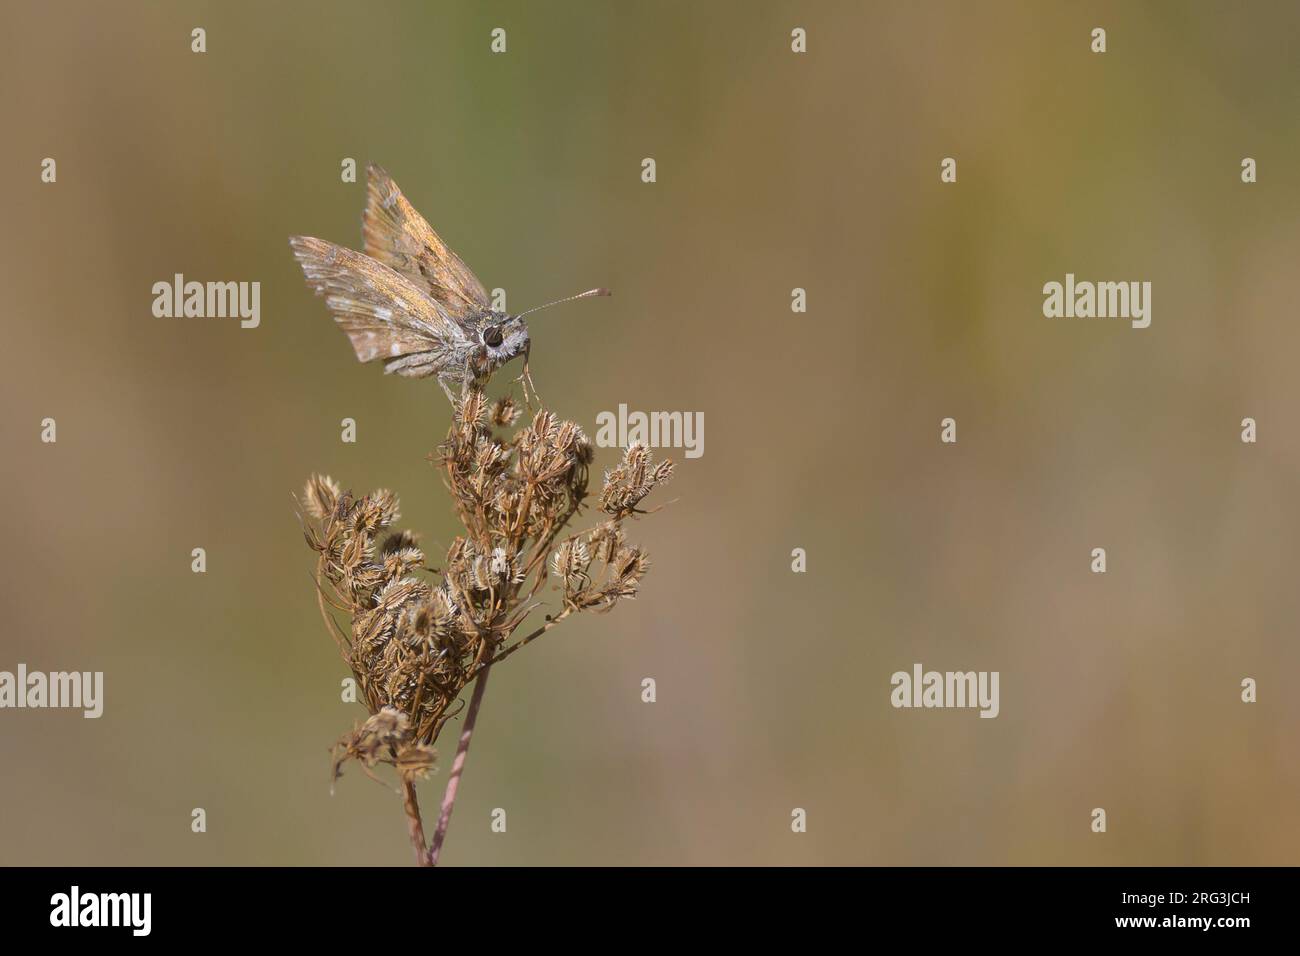 Mallow skipper (Carcharodus alceae) foraging, with the vegetation as background. Stock Photo